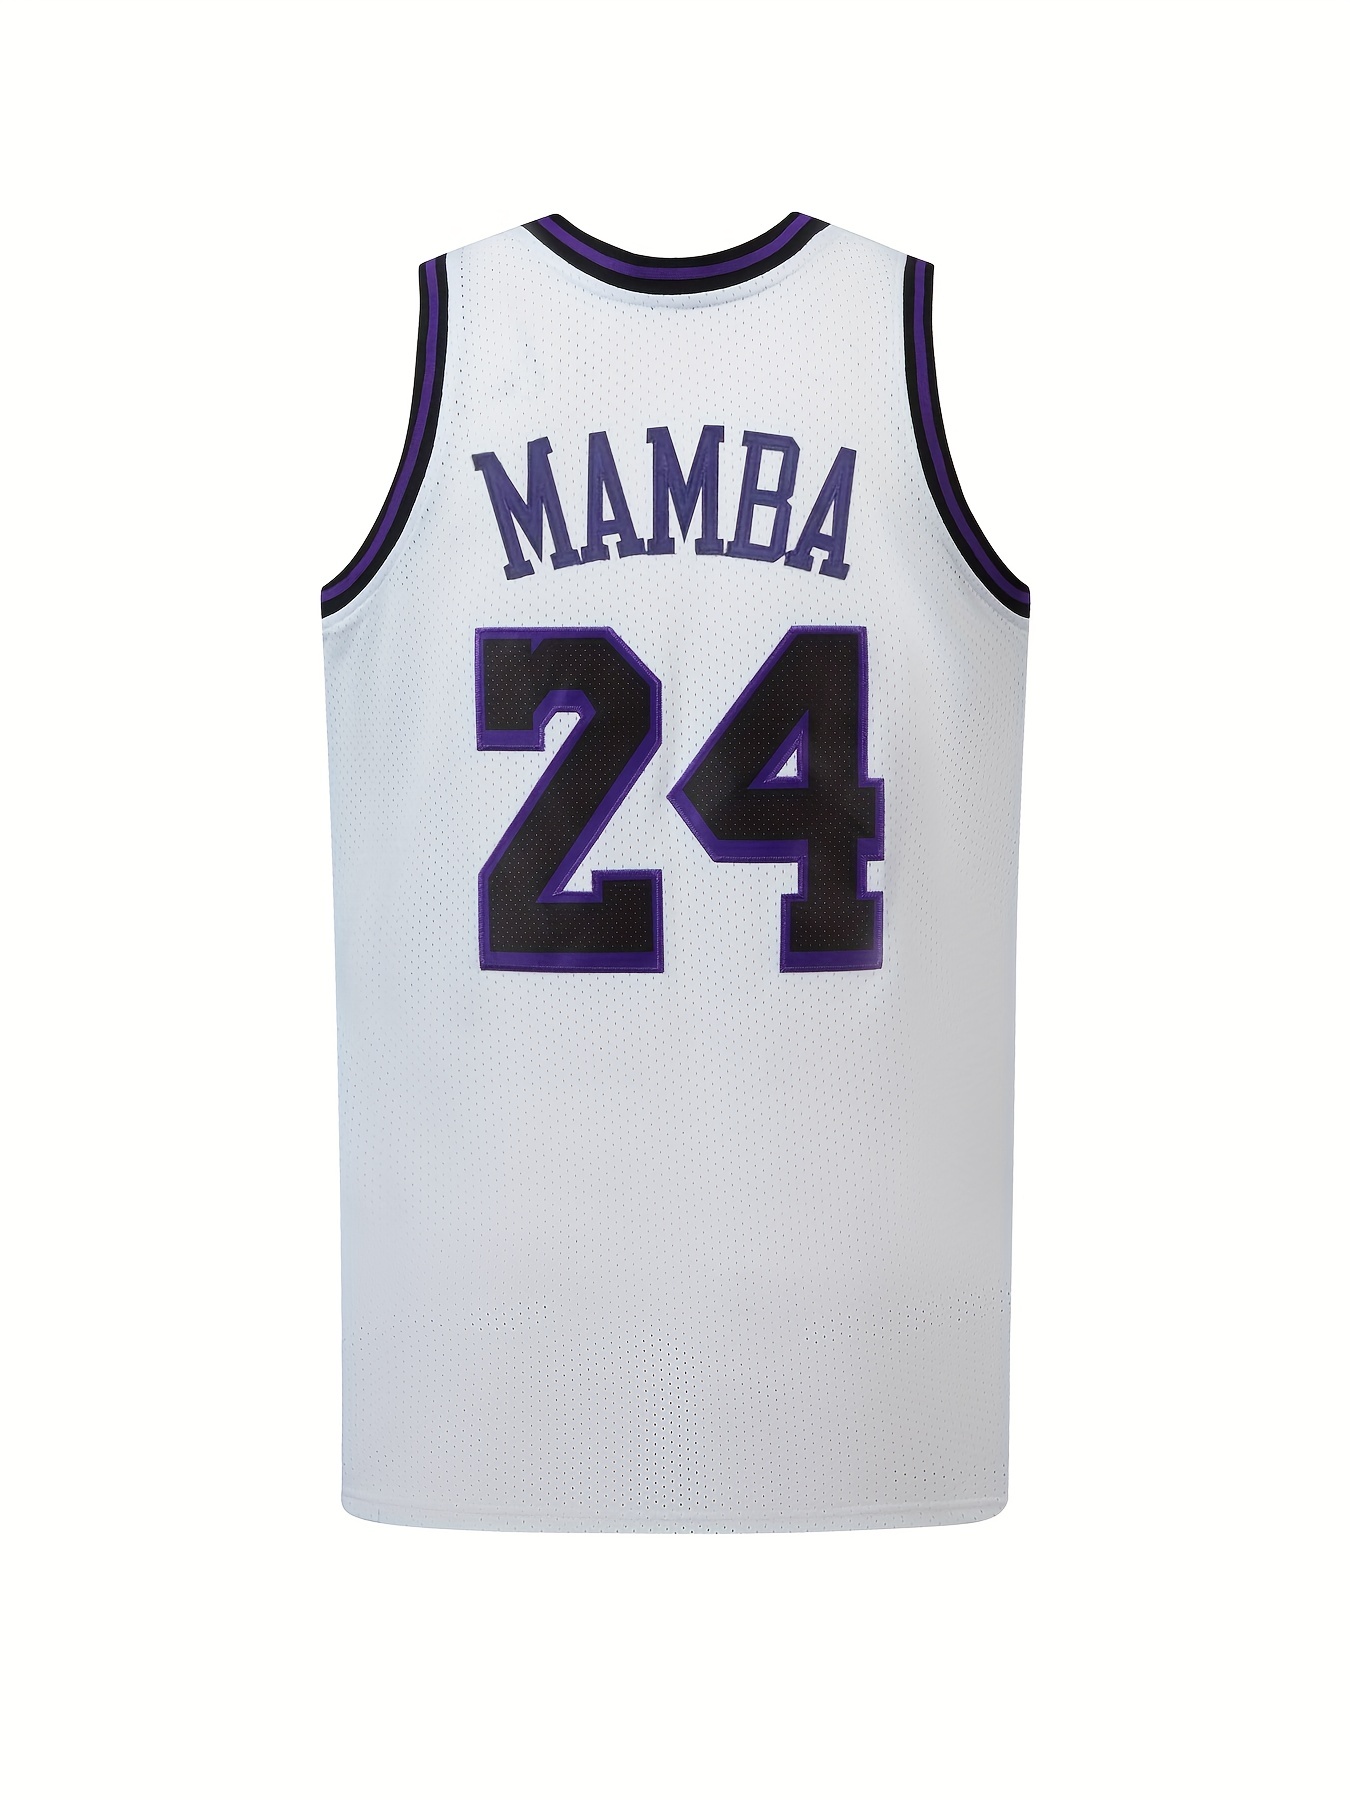 Men's Basketball Jersey, Retro Breathable Sports Uniform, Sleeveless Basketball Shirt for Training Competition Party Costume Gift,Temu